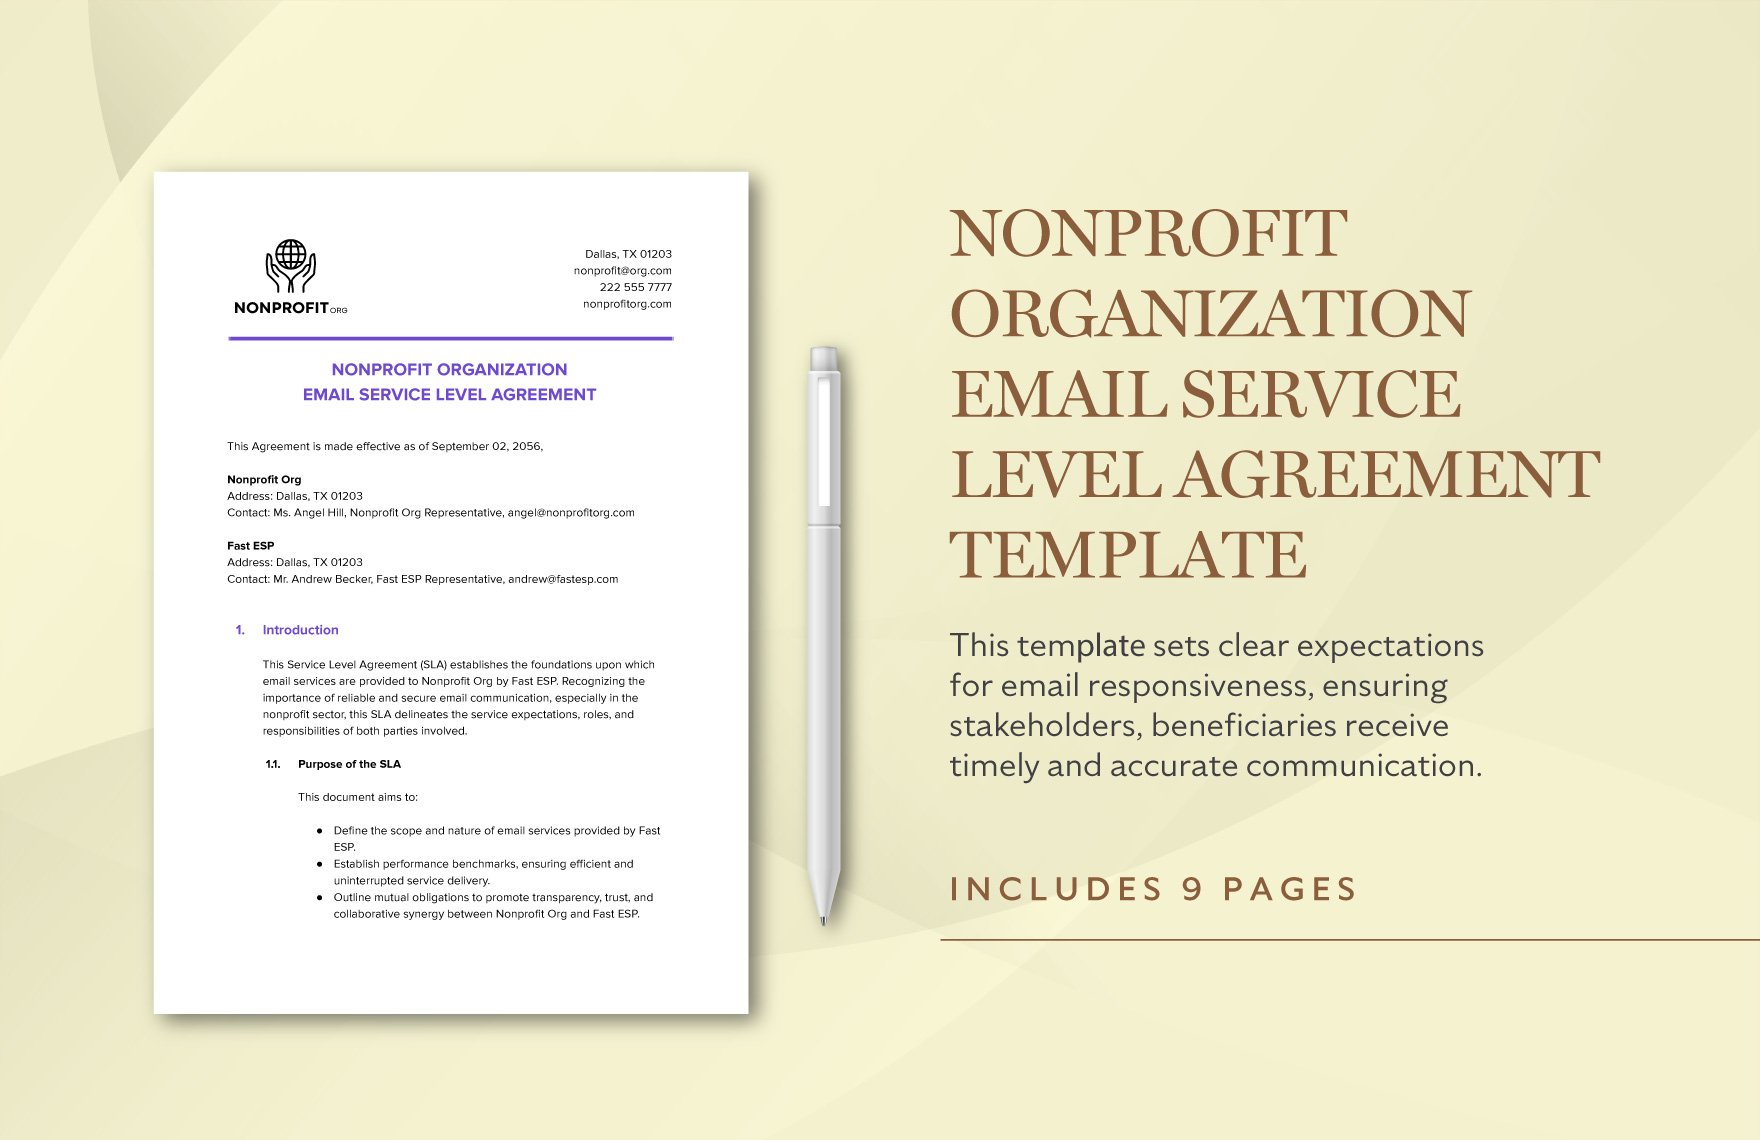 Nonprofit Organization Email Service Level Agreement Template